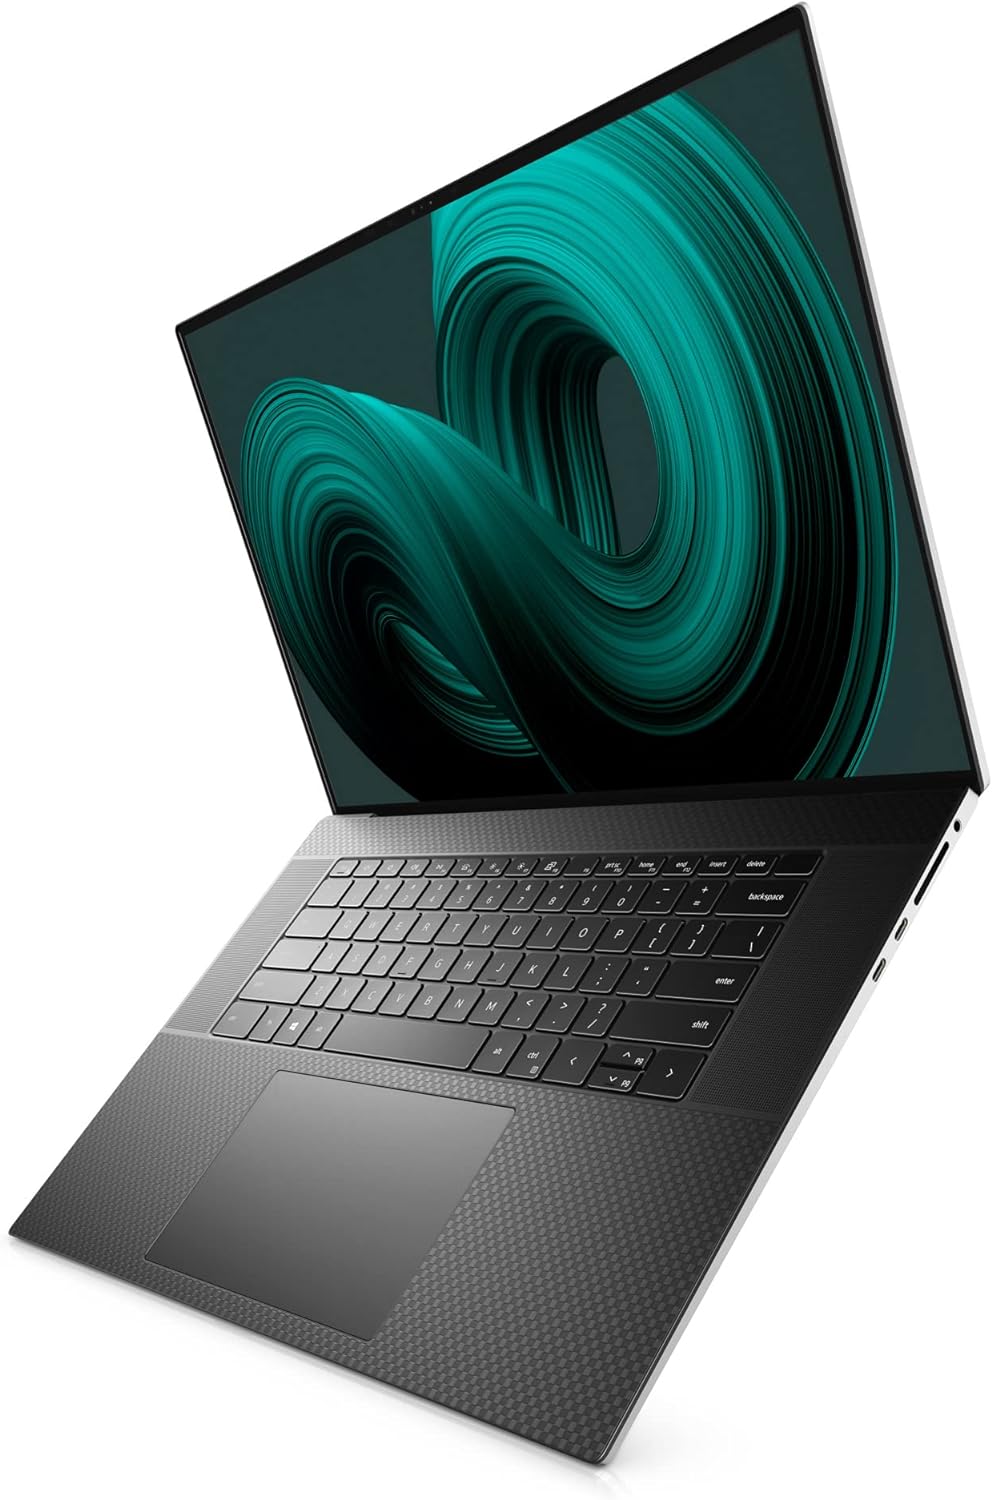 Dell XPS 17 9710, 17 inch FHD+ Laptop - $869